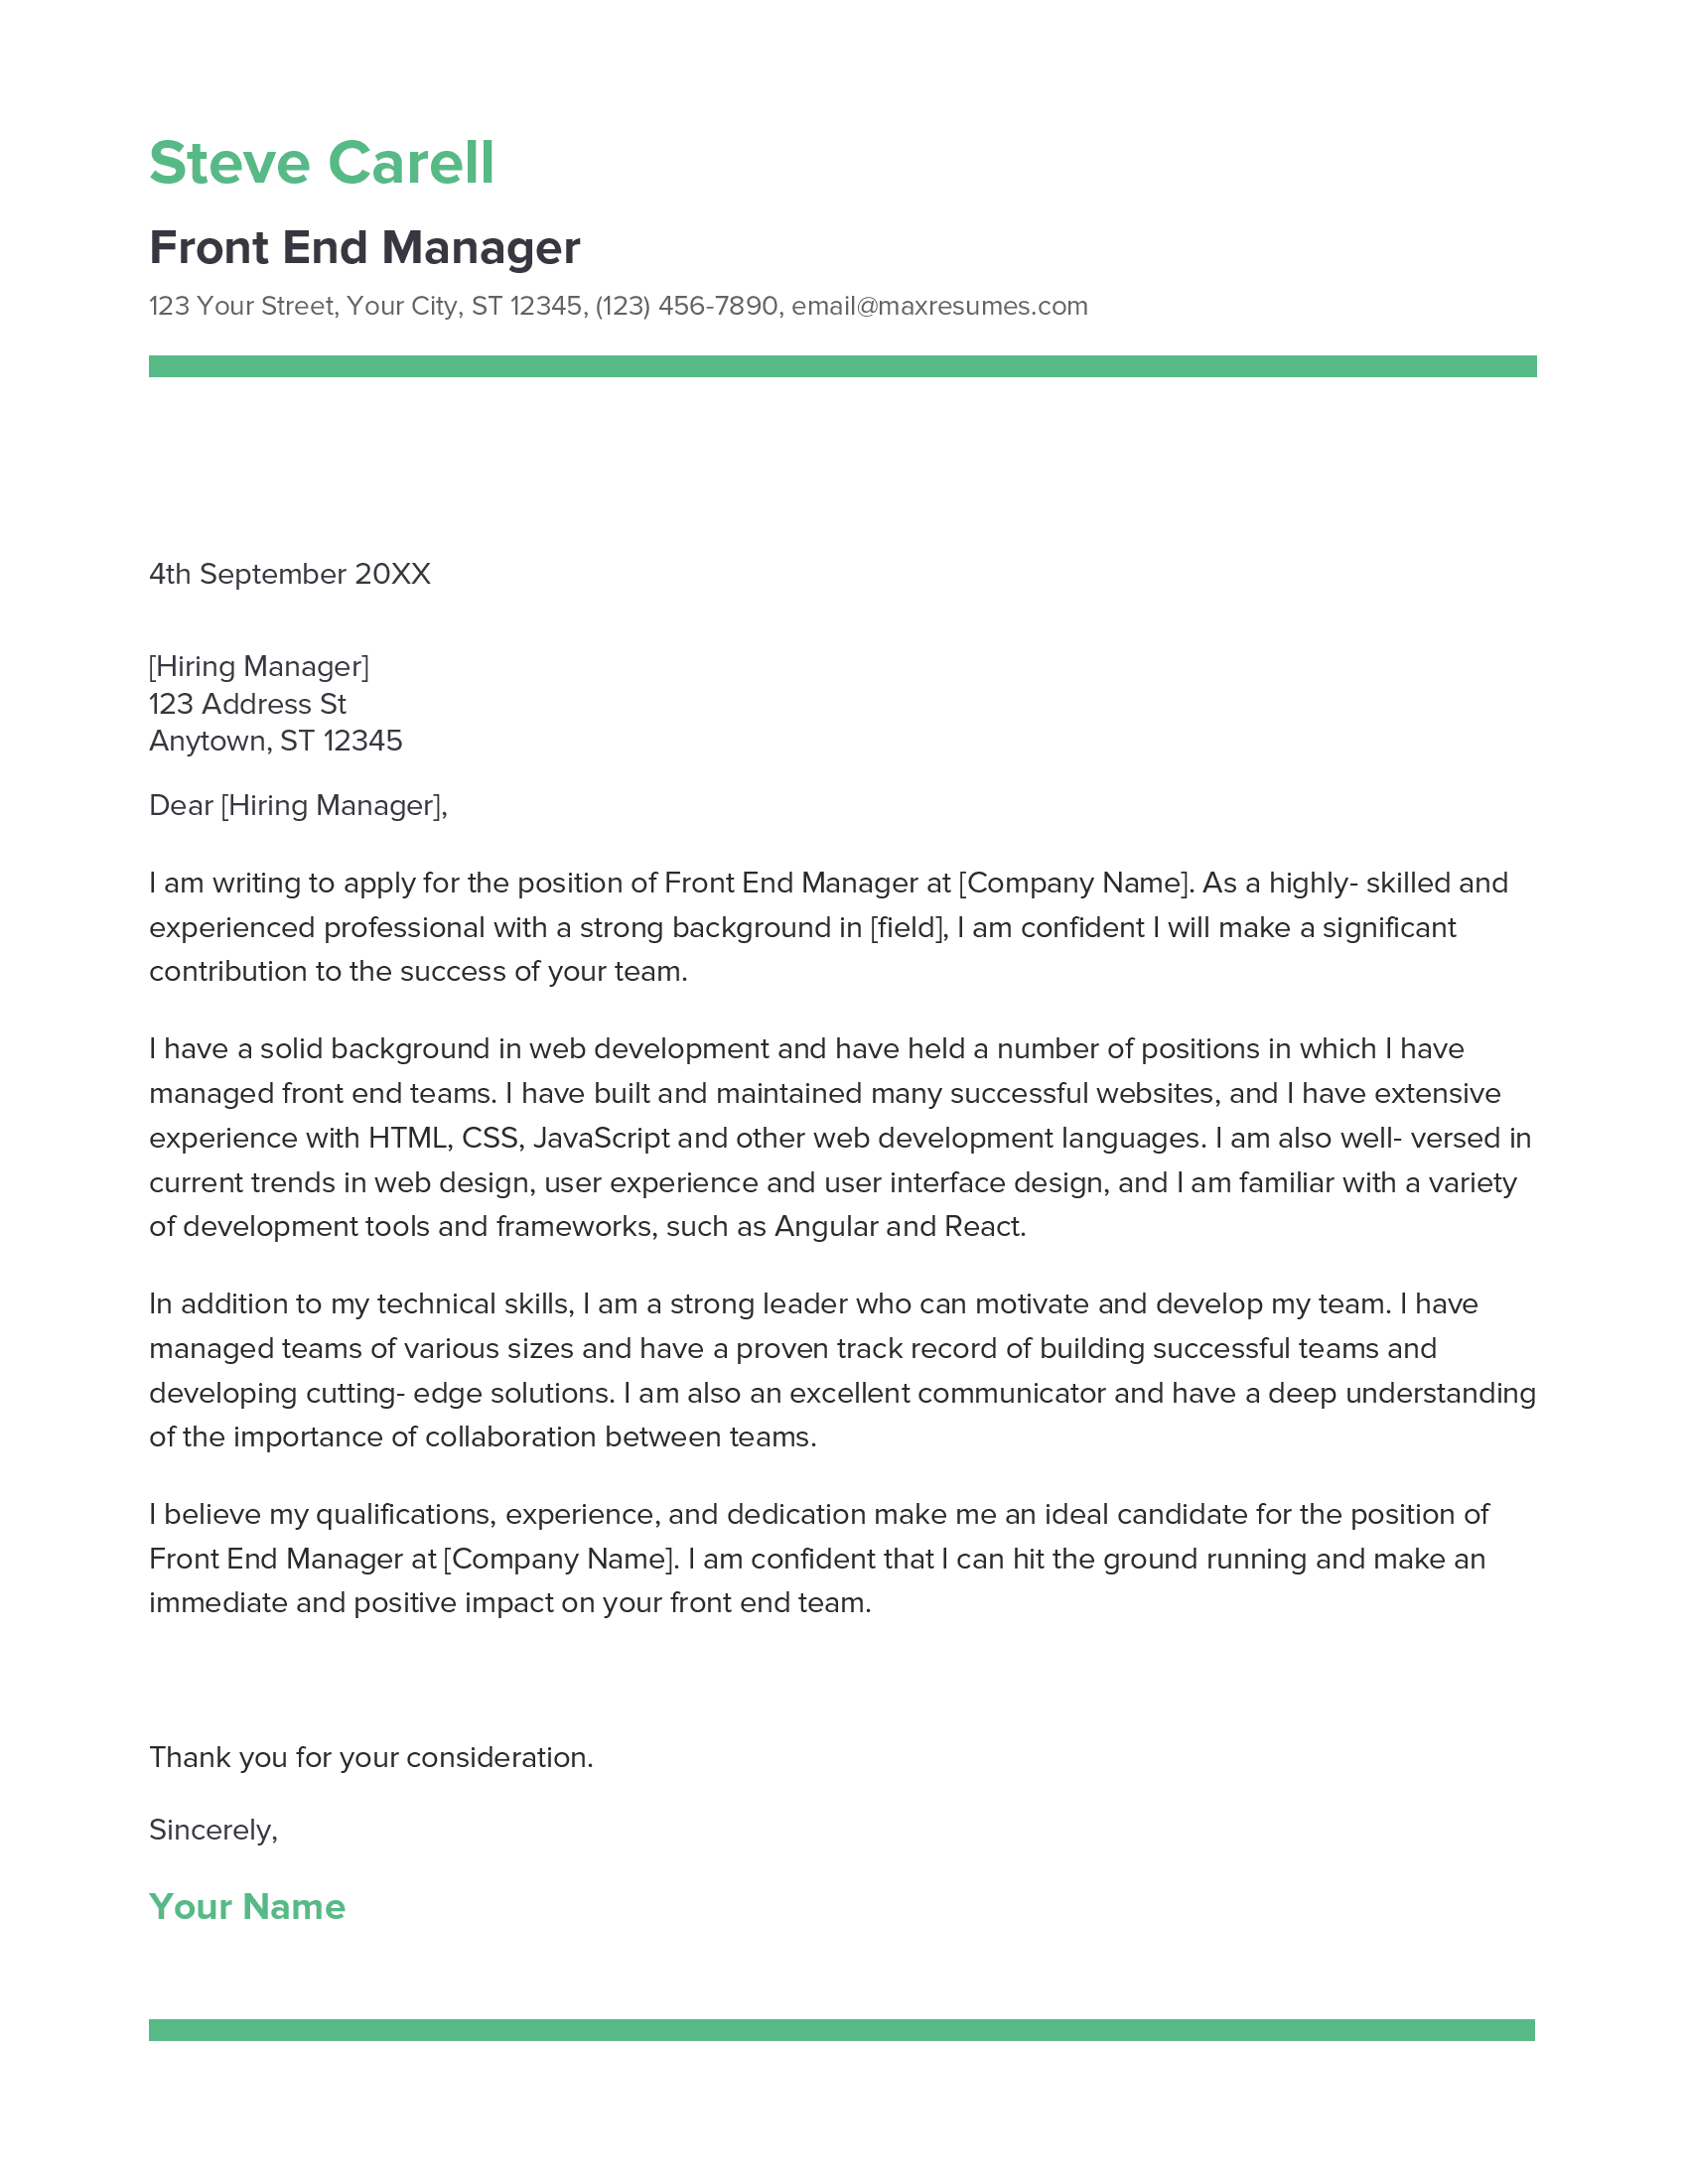 Front End Manager Cover Letter Example